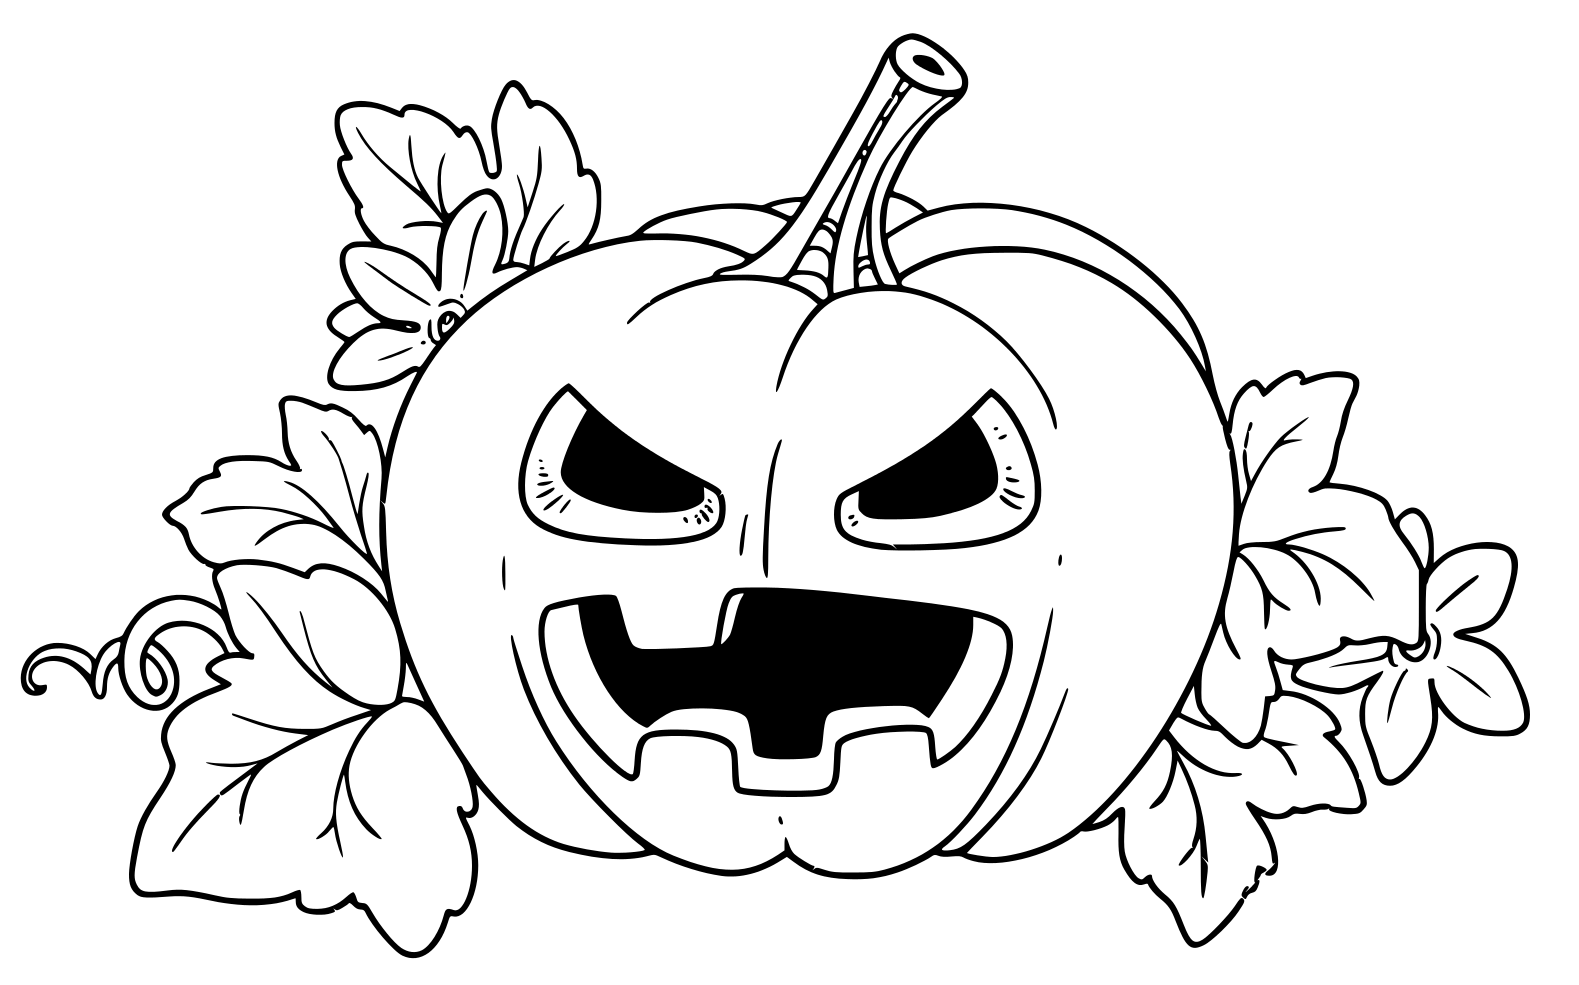 Lantern From Pumpkin With The Cut Out Of A Terrible Grin And Leaves Outlined Coloring Page